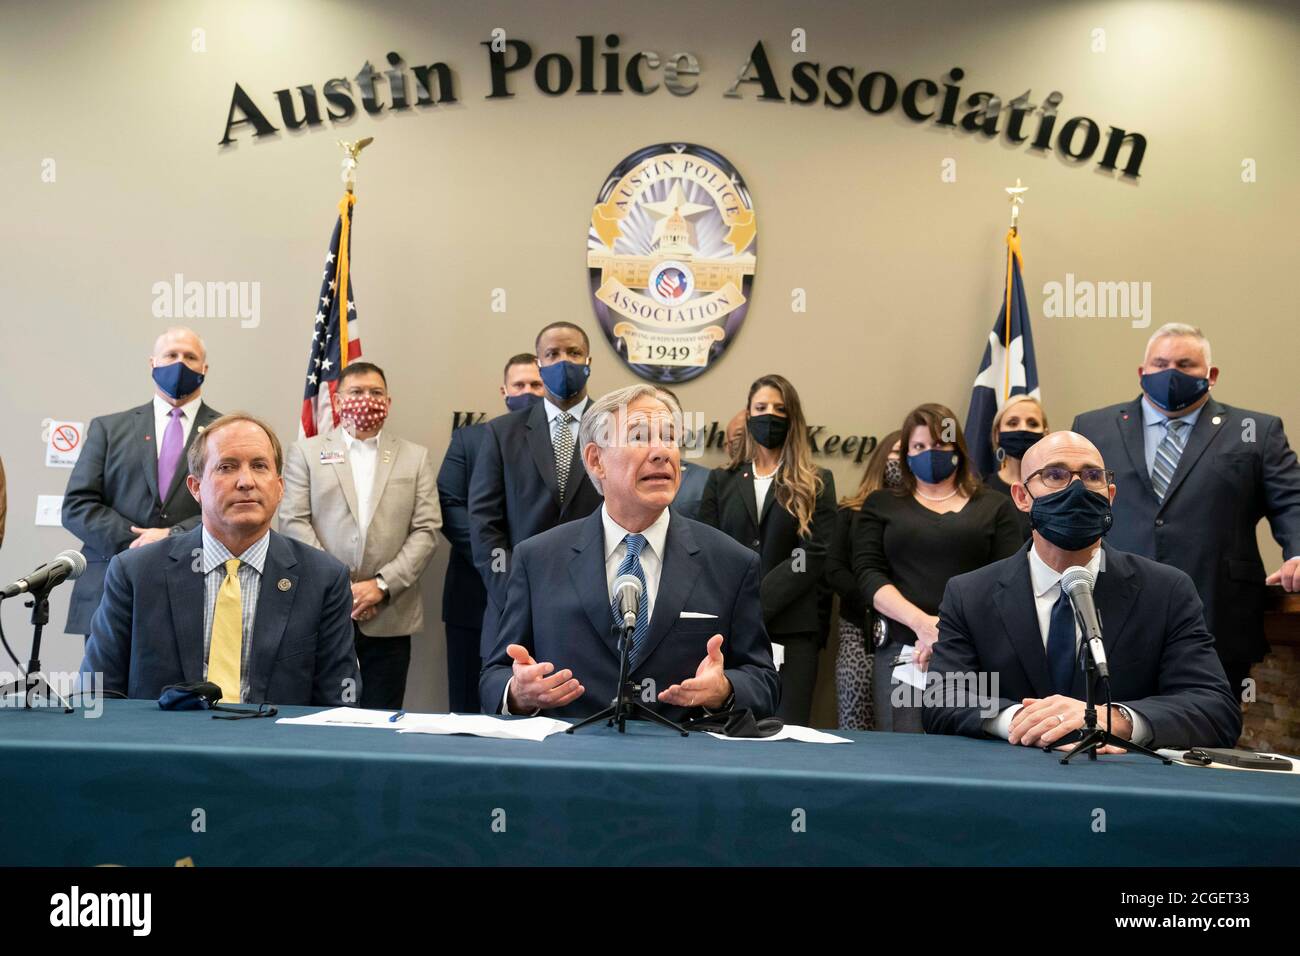 Austin, TX USA September 10, 2020: Texas Governor Greg Abbott, c, flanked by Republican Attorney General Ken Paxton, l, and House Speaker Dennis Bonnen, holds a press conference with Austin police association leaders to announce a plan to punish Texas cities that cut police spending. Abbott also asked state legislators and candidates for office to sign a pledge backing police with the hashtag #TexasBackstheBlue. Credit: Bob Daemmrich/Alamy Live News Stock Photo